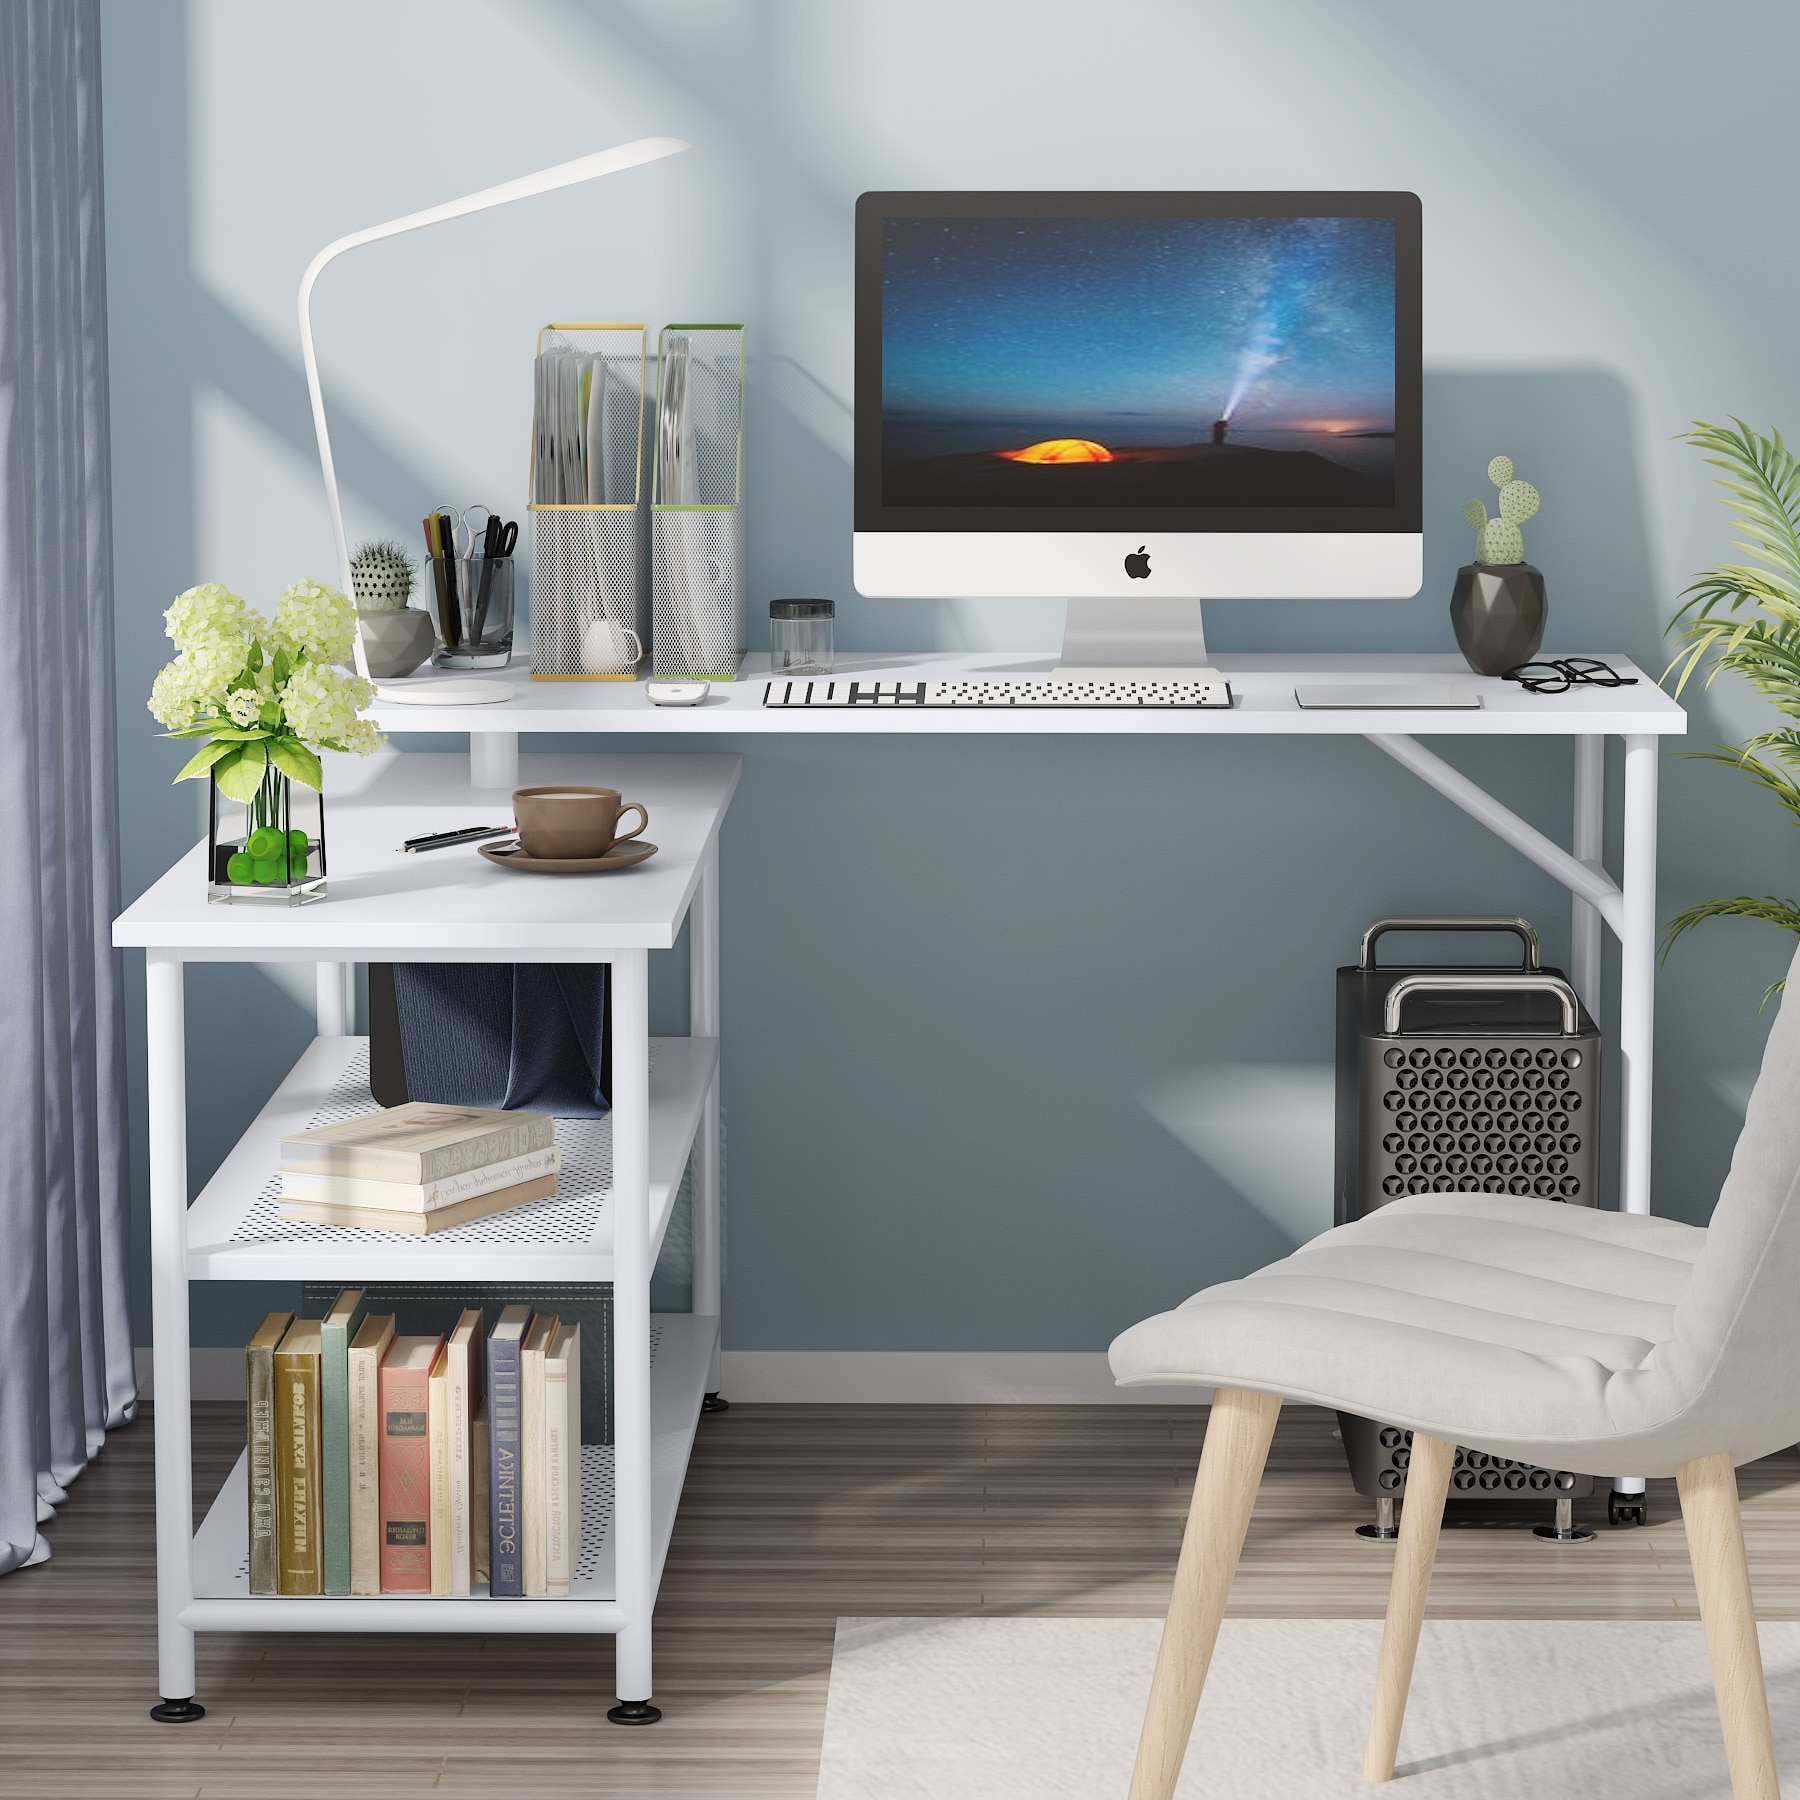 https://ak1.ostkcdn.com/images/products/is/images/direct/112644361bbaea218a38dc667bb0efdd01b2748f/Folding-Computer-Desk-with-Storage-Shelves%2C-360-Rotating-L-Shape-Corner-Desk%2C-Large-PC-Gaming-Desk-for-Home-Office-Small-Space.jpg